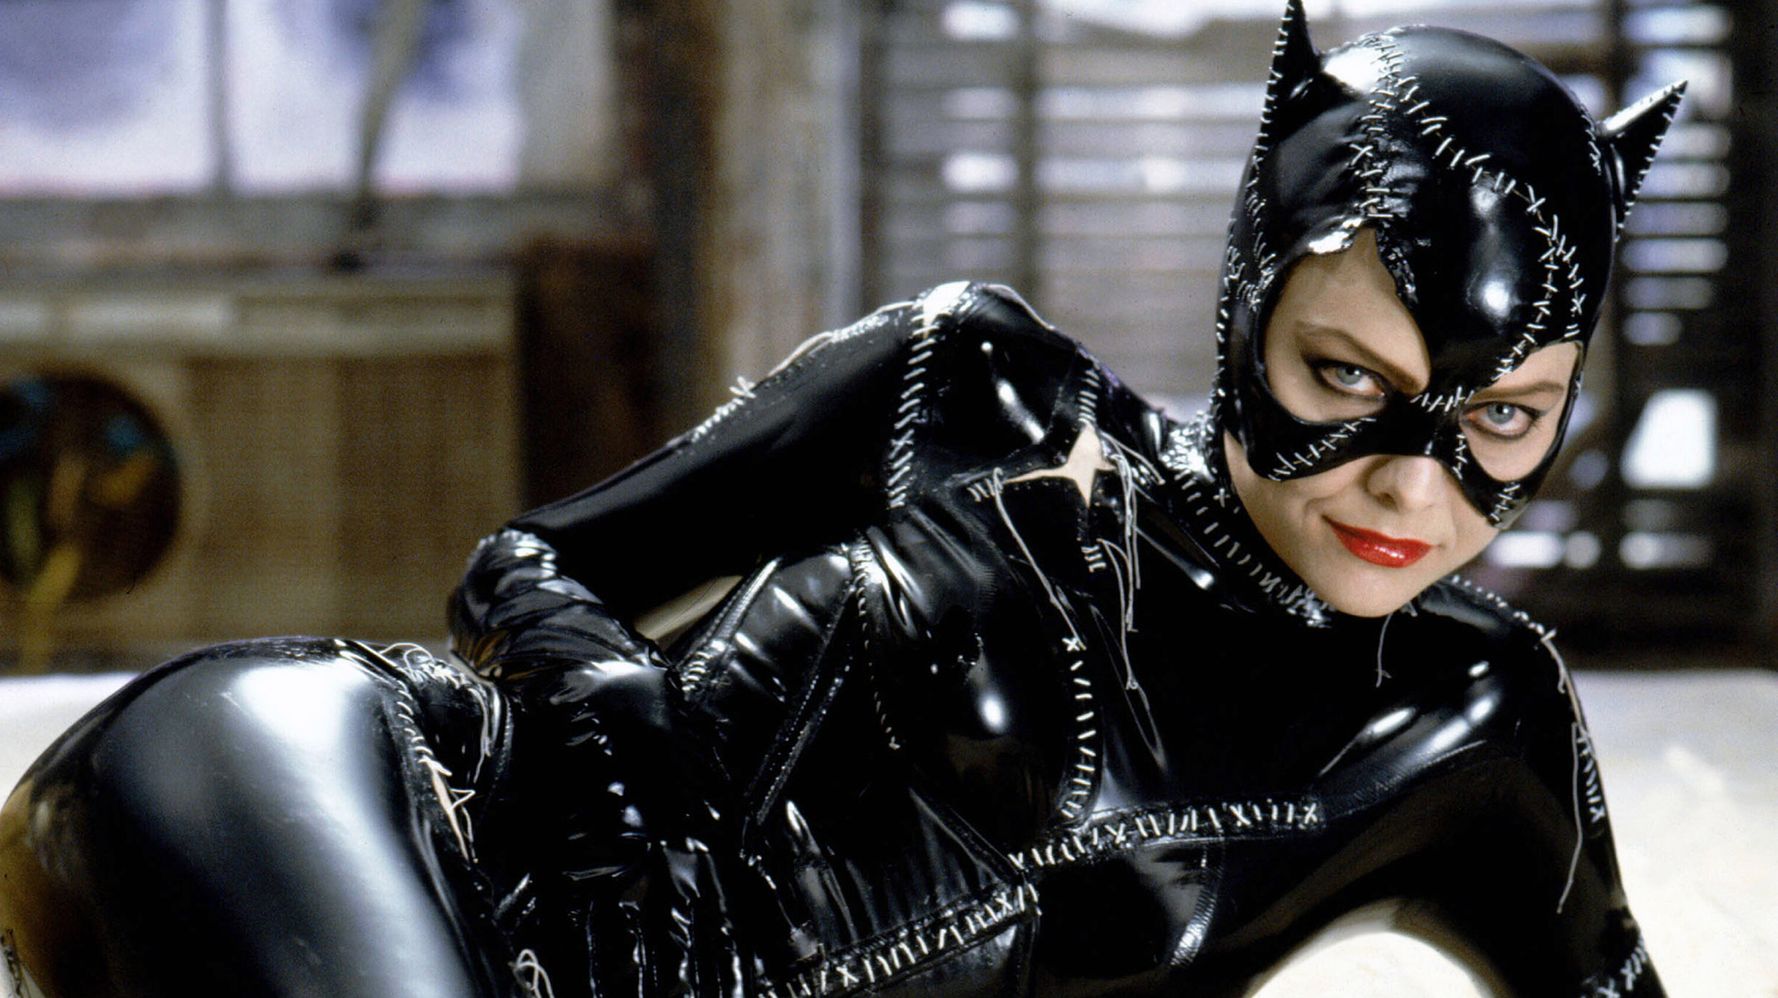 DC Says Batman Can't Go Down On Catwoman Since 'Heroes Don't Do That'